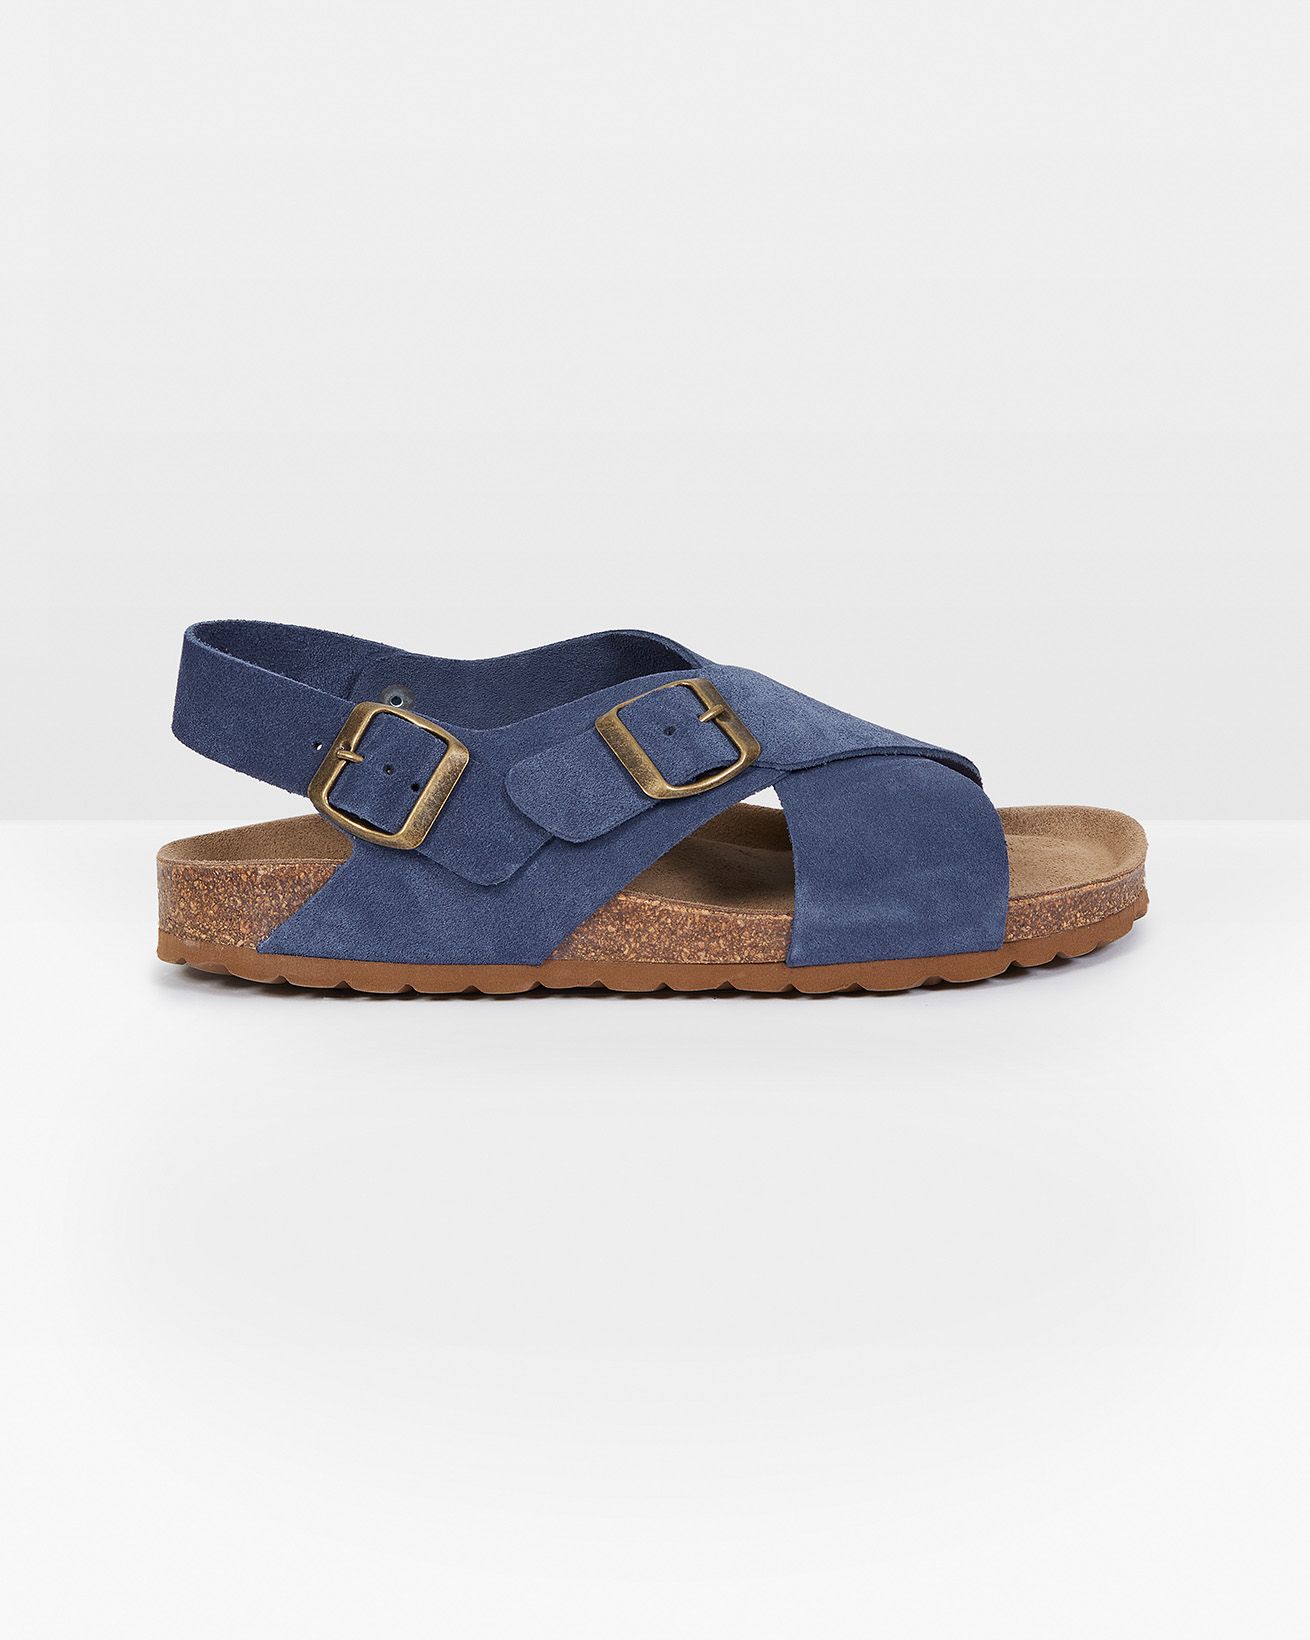 Crossover Buckle Sandals